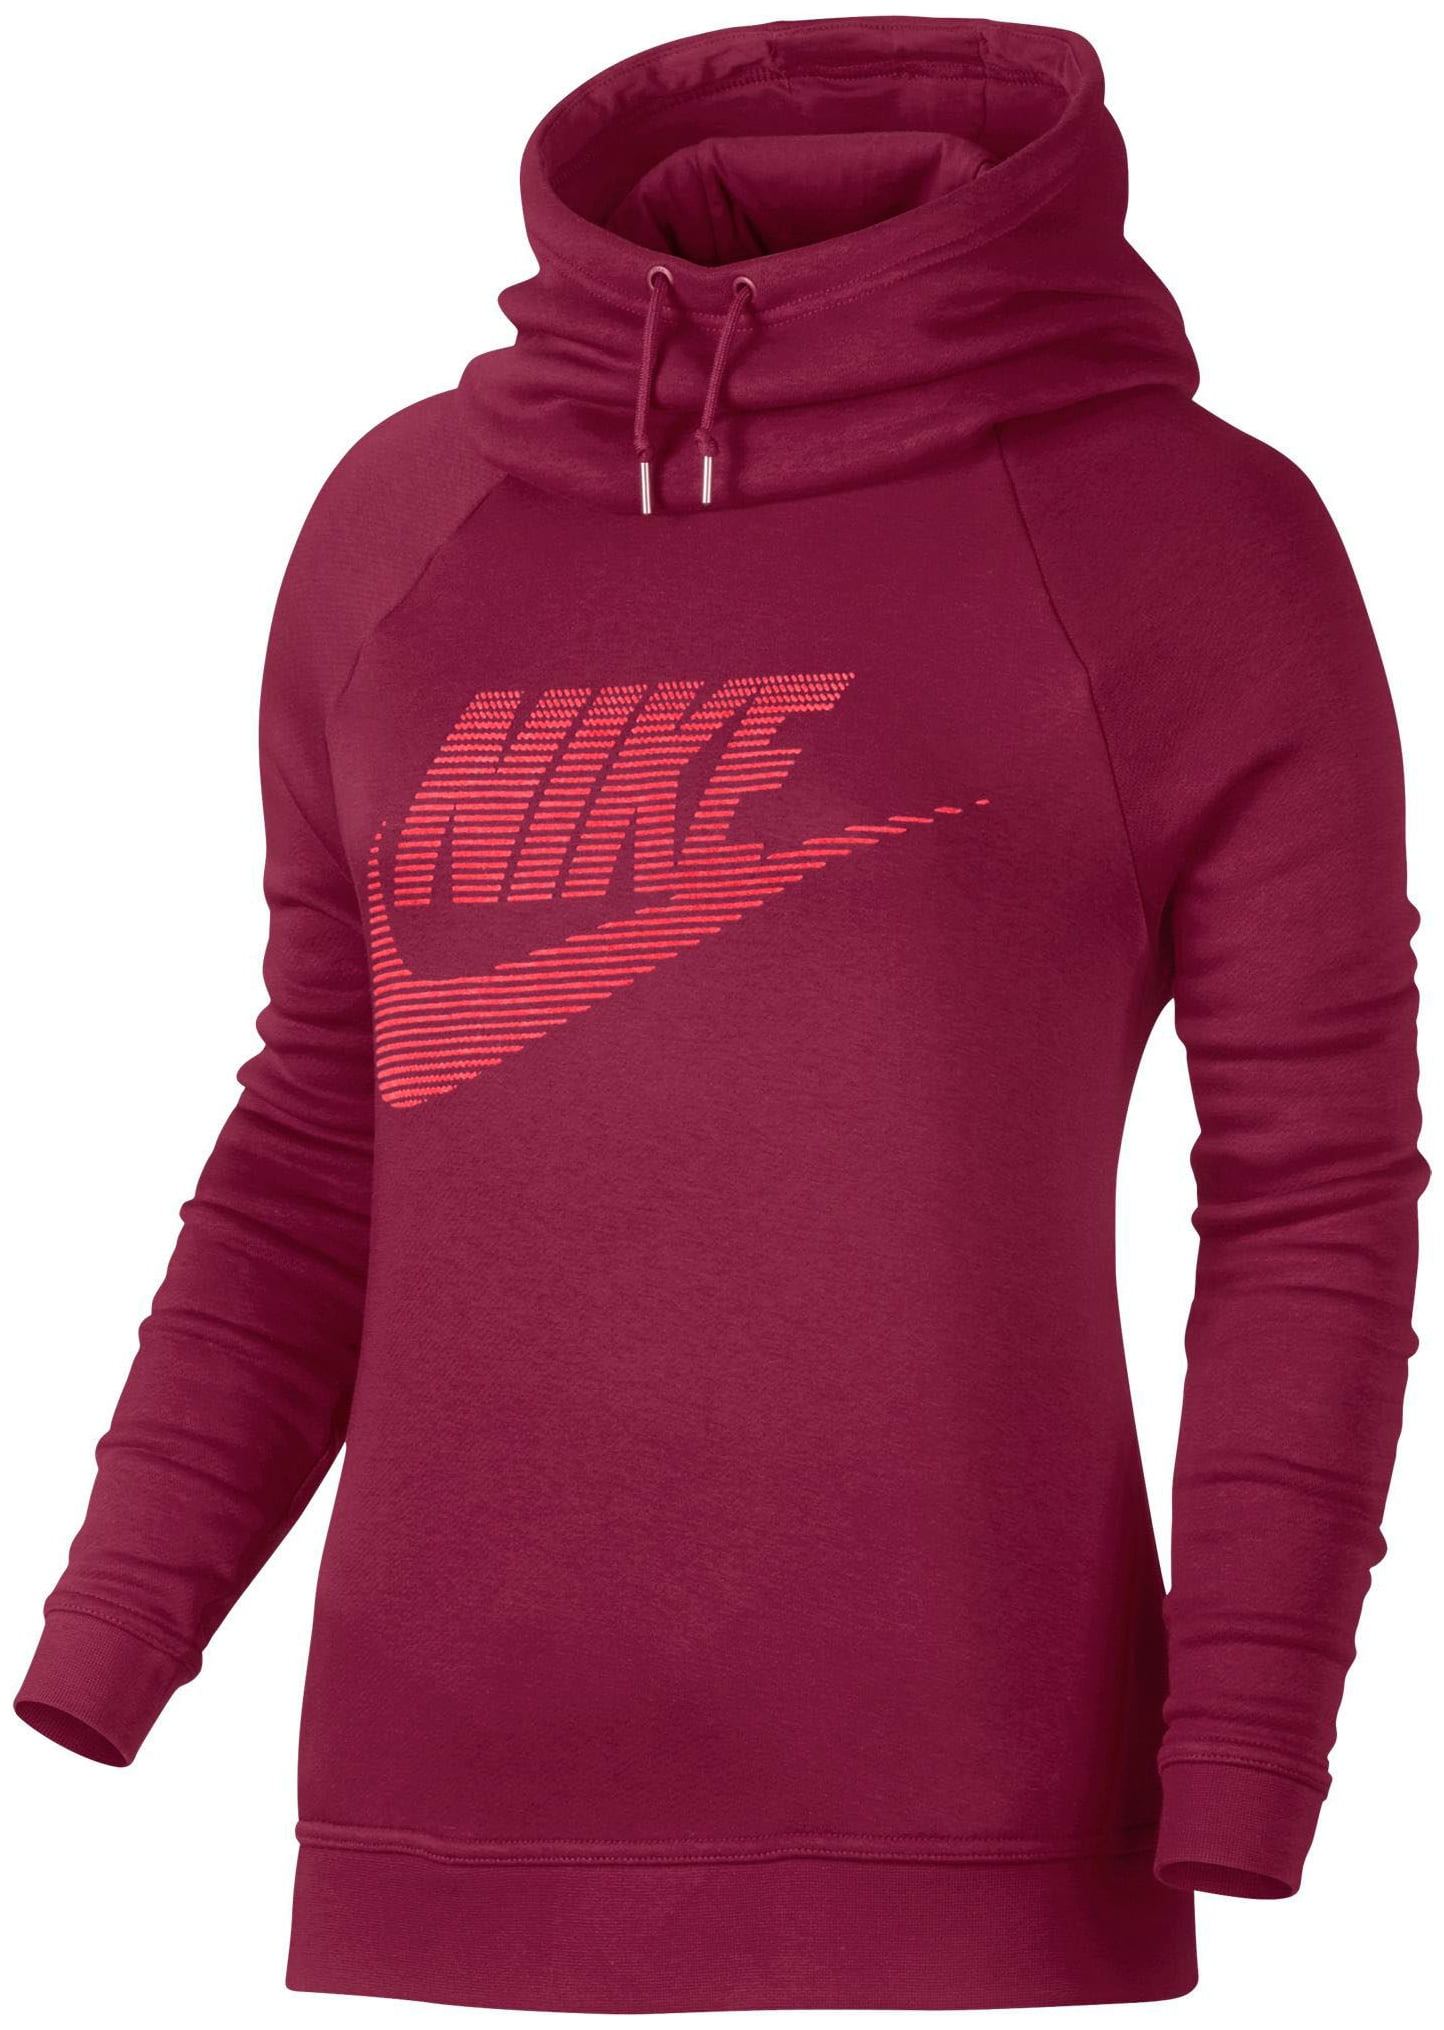 Nike Women's Sportswear Rally Funnel Neck Graphic Hoodie - Noble Red ...